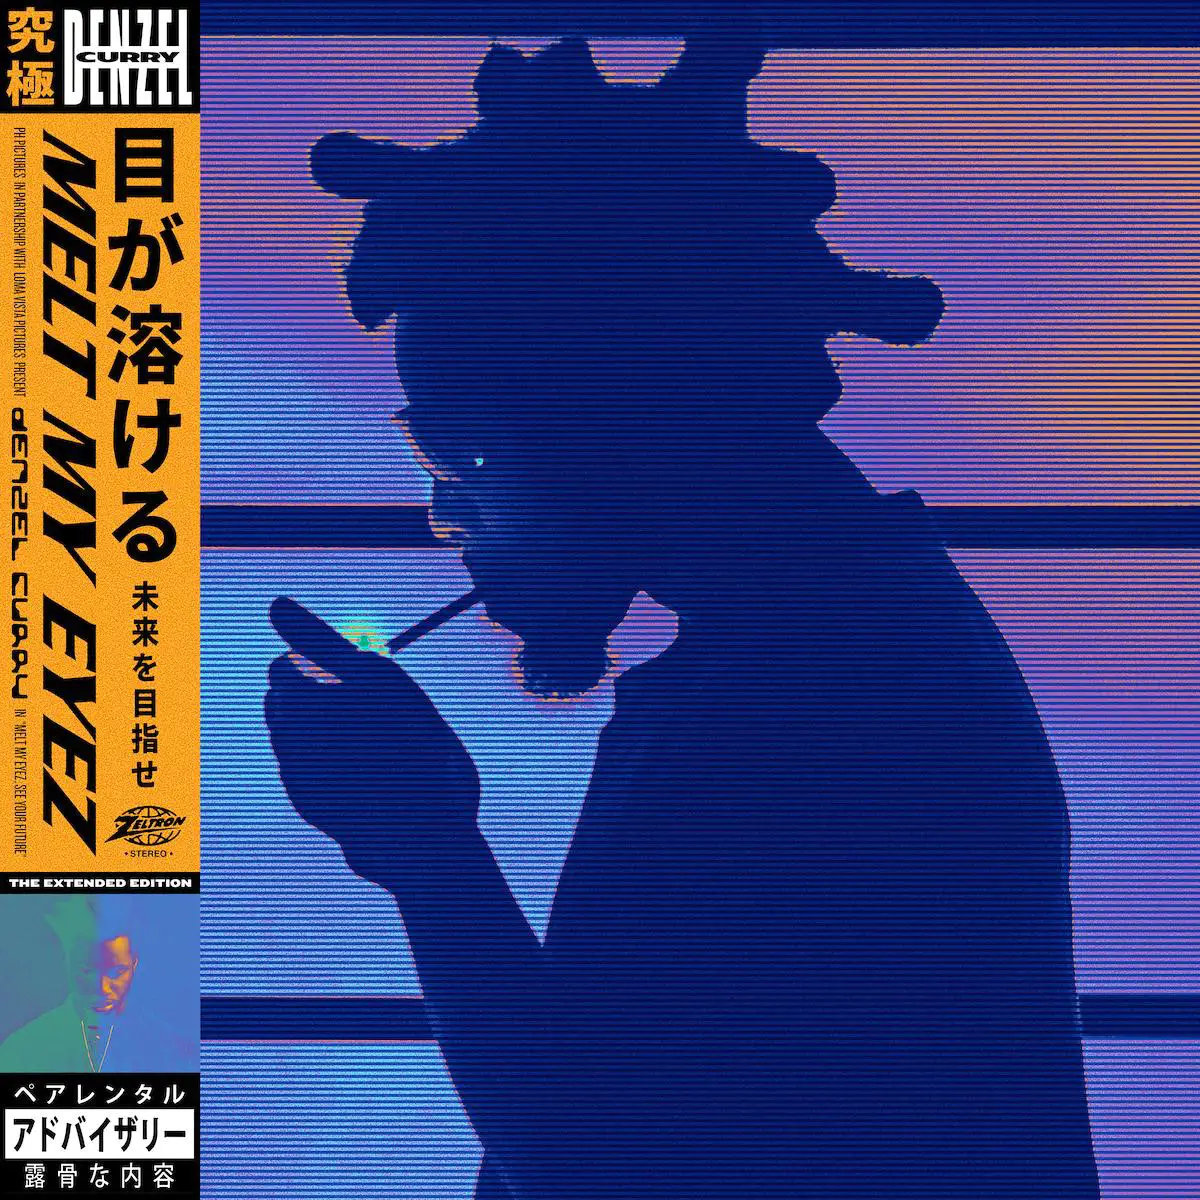 Denzel Curry Releases 'Melt My Eyez See Your Future: The Extended Edition' &Amp; Physical Album, Yours Truly, News, February 24, 2024